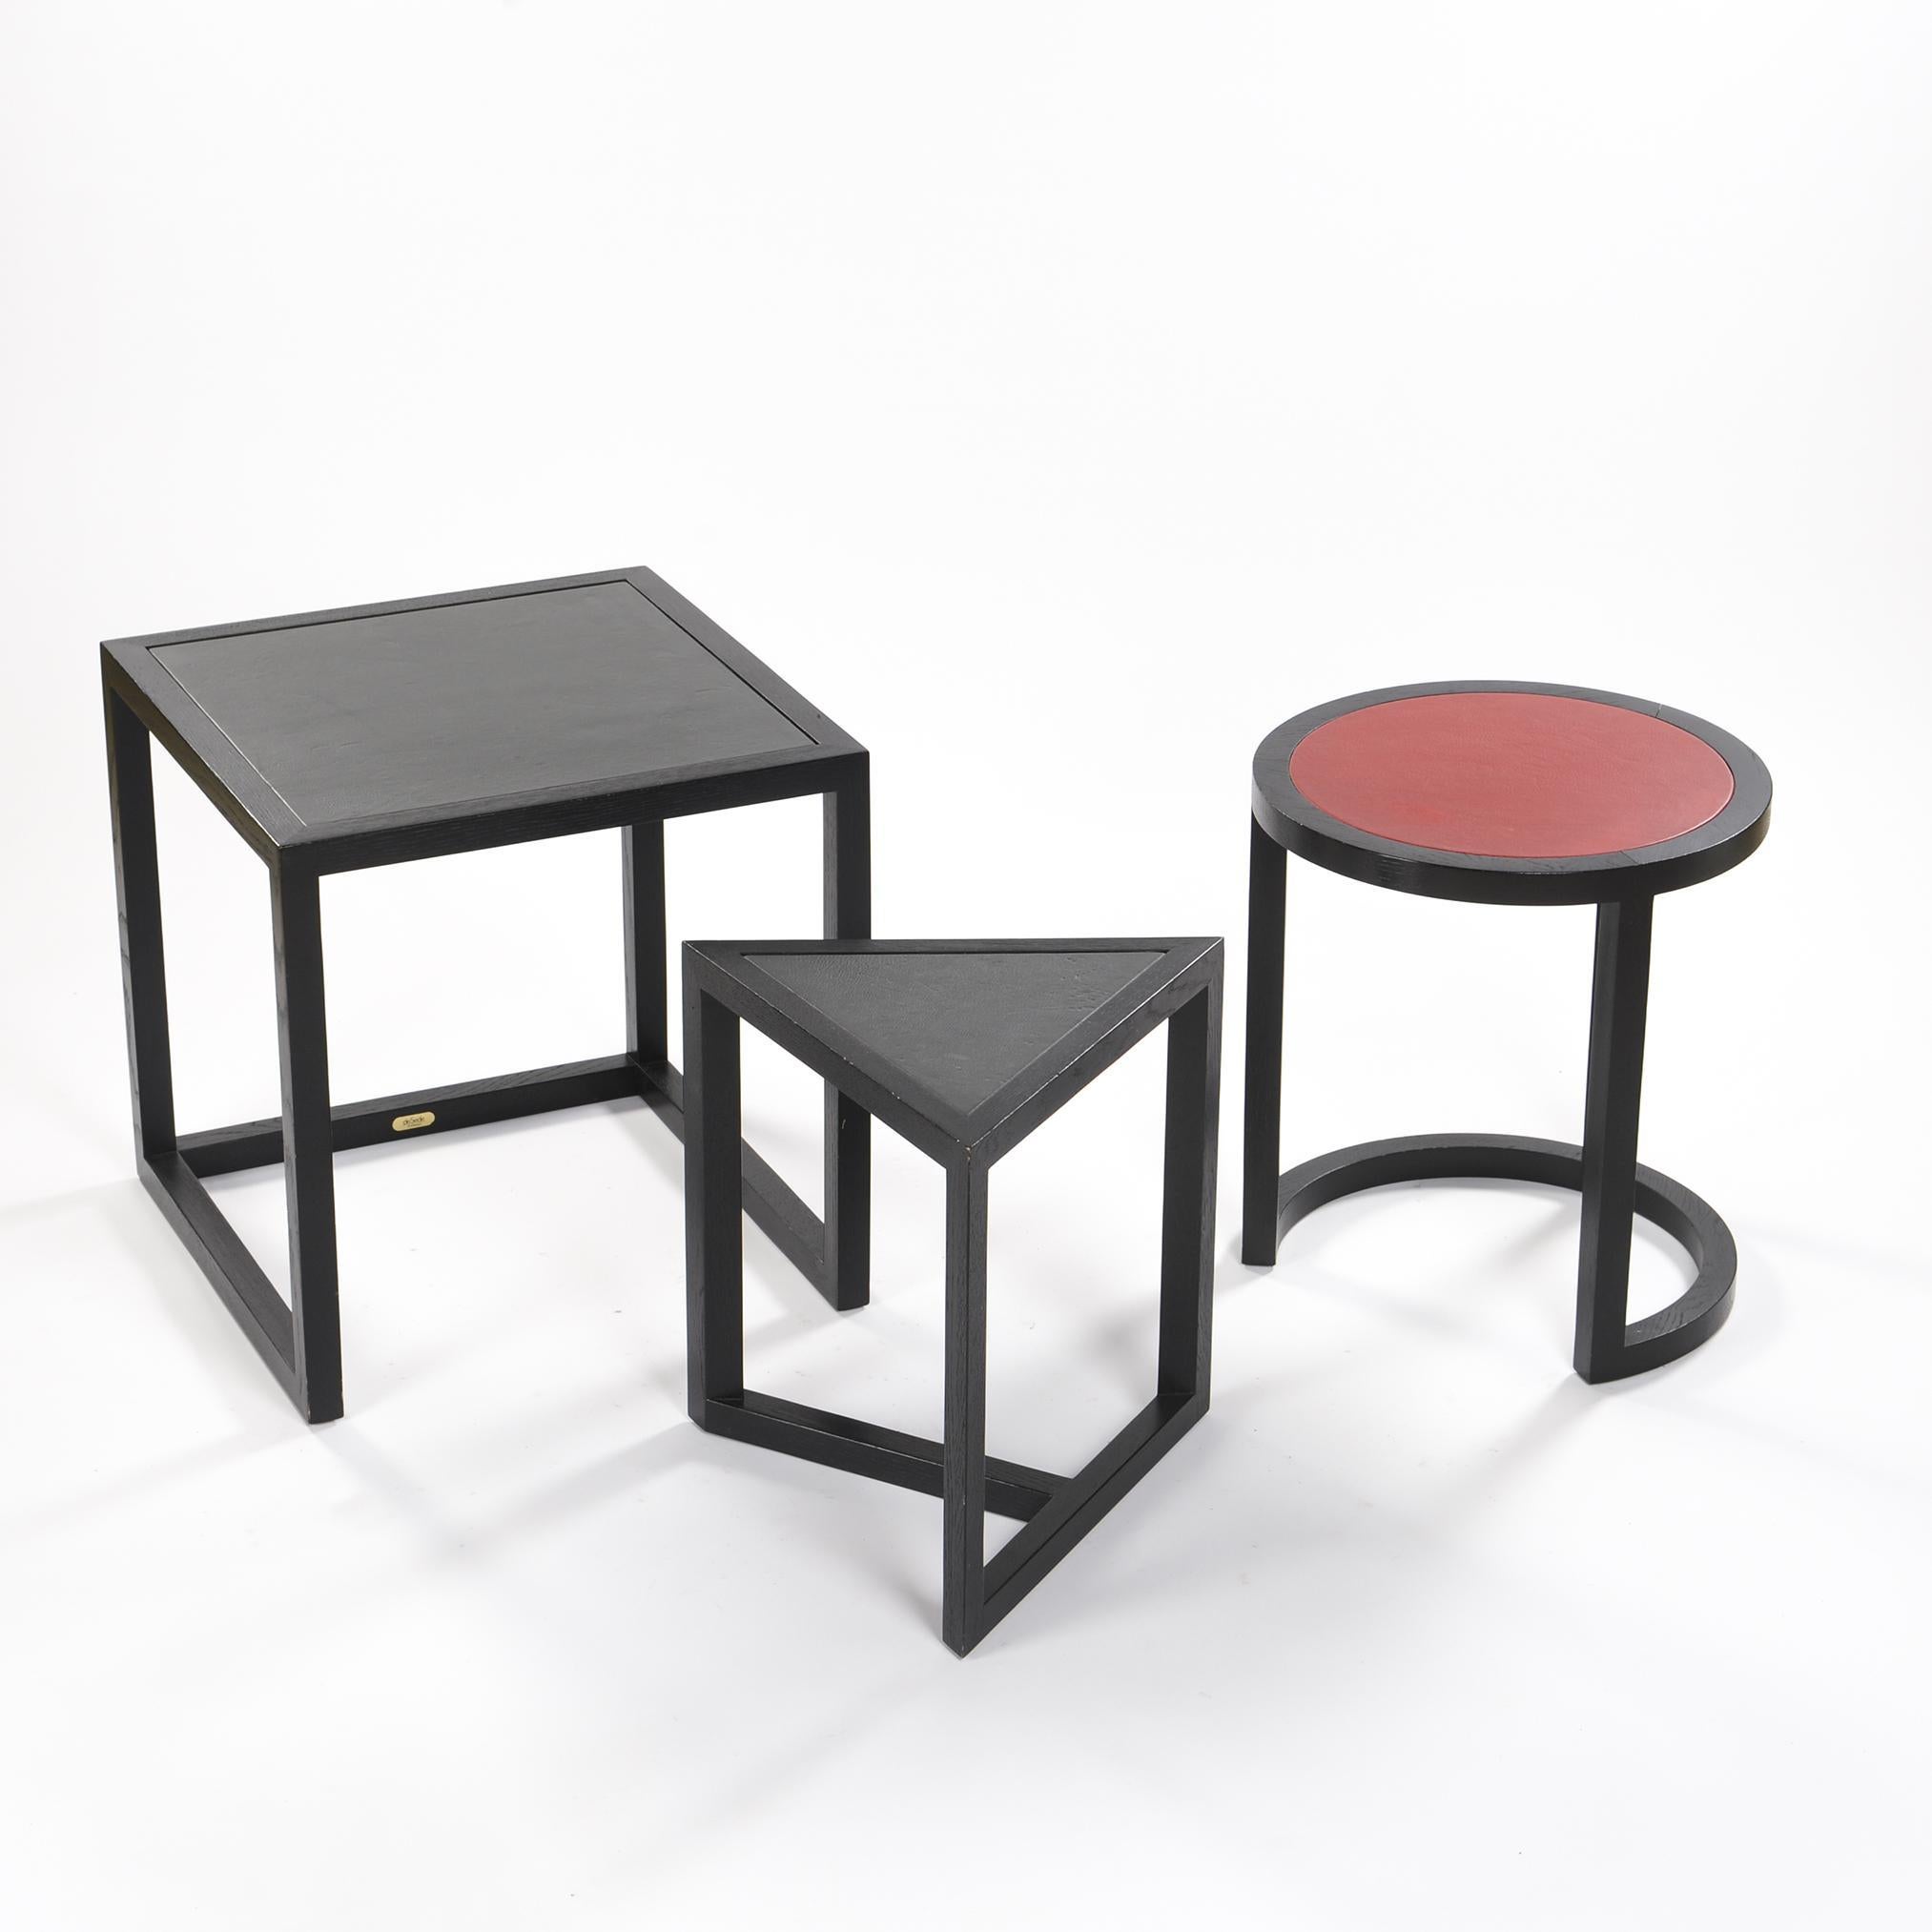 Nesting tables by Stefan Zwicky, model DS 9400, with a graphic design in square, round and triangular shapes.

The frame in black-stained solid oak is partially covered with leather on the tops.

Edition: De Sede, circa 1989.
Limited edition from